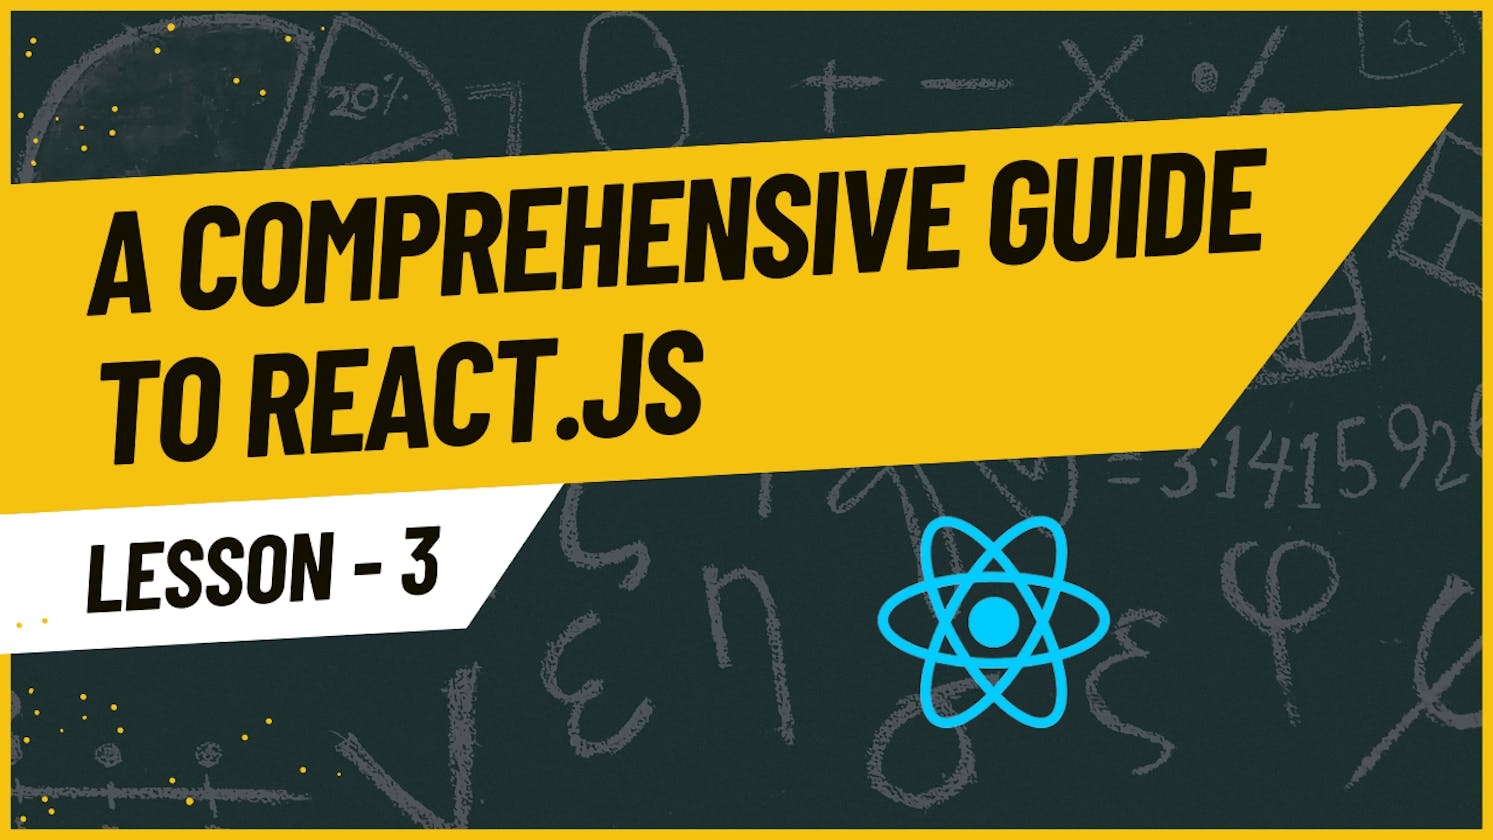 Mastering React: A Guide to Events, State, and Hooks for Dynamic UrIs|| Lesson - 3